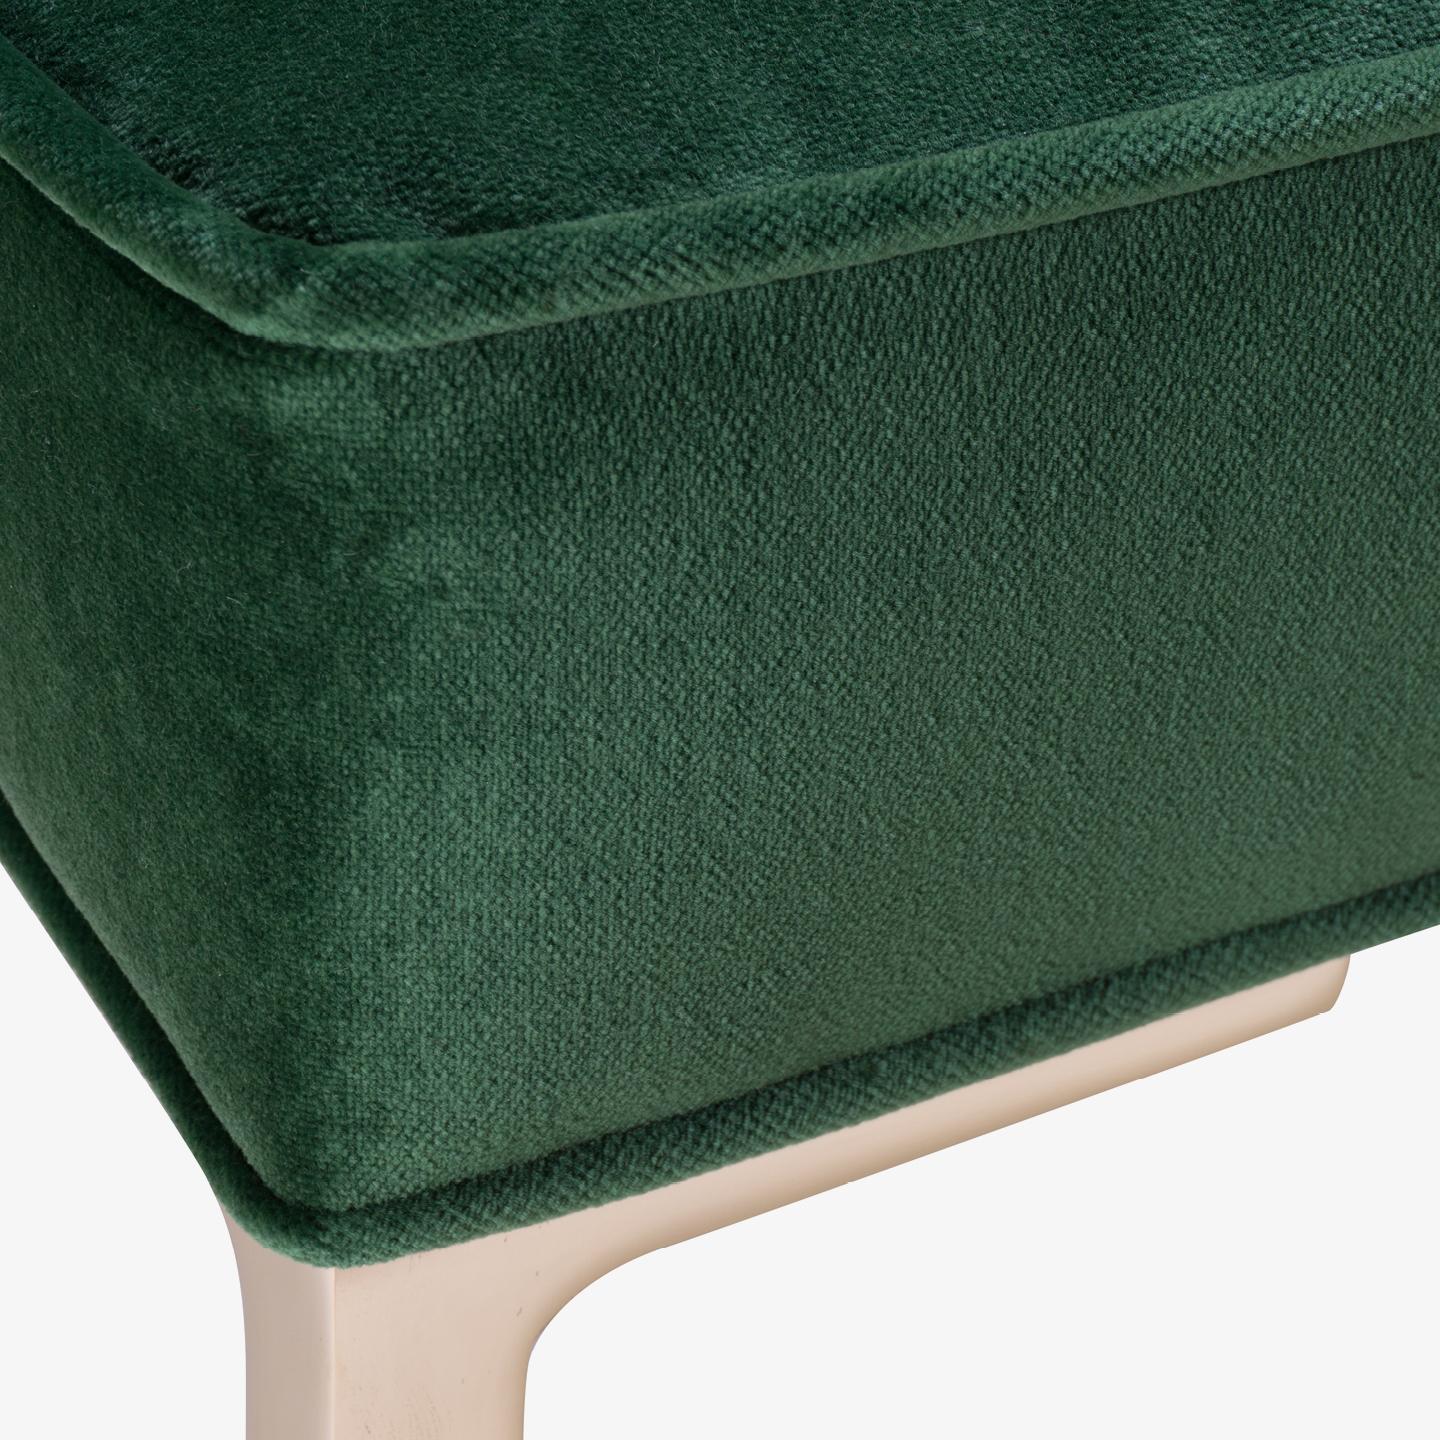 American Astor Square Brass Ottoman in Emerald Velvet by Montage For Sale